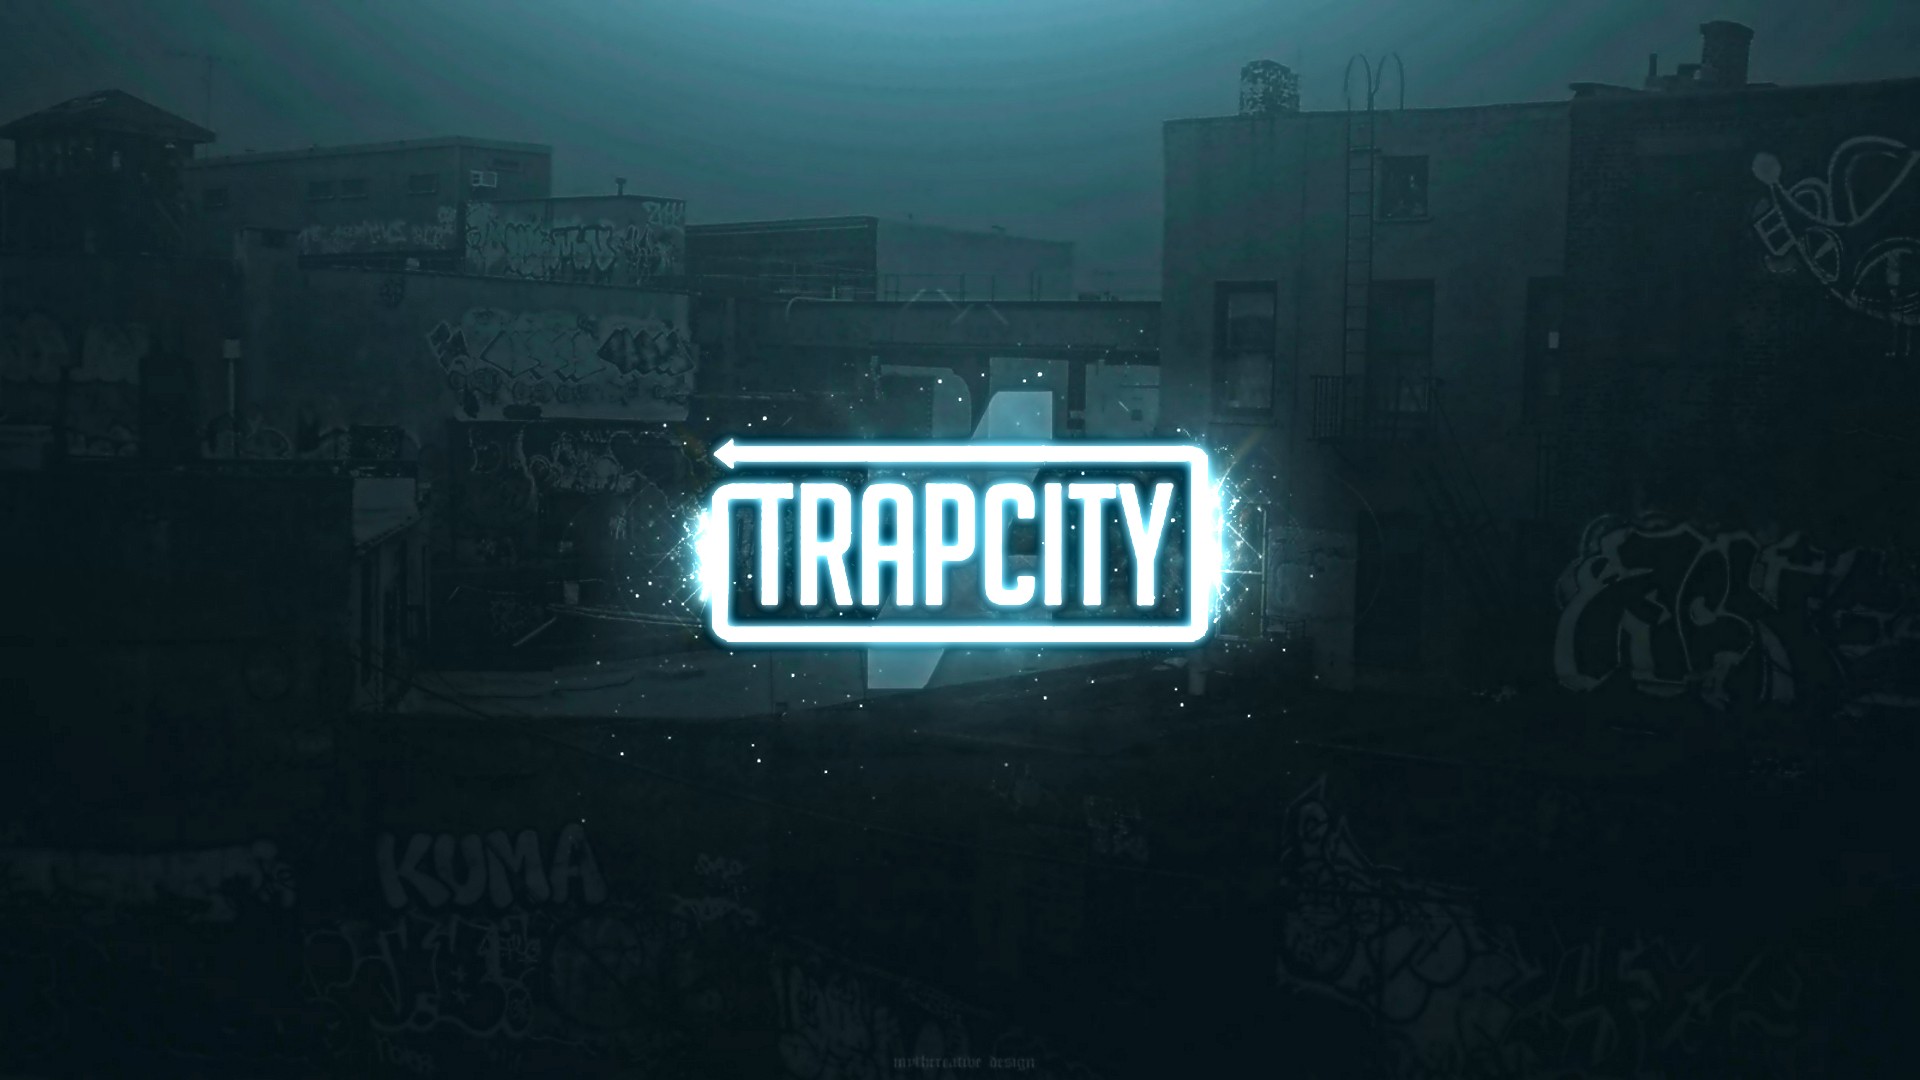 Trap Wallpapers